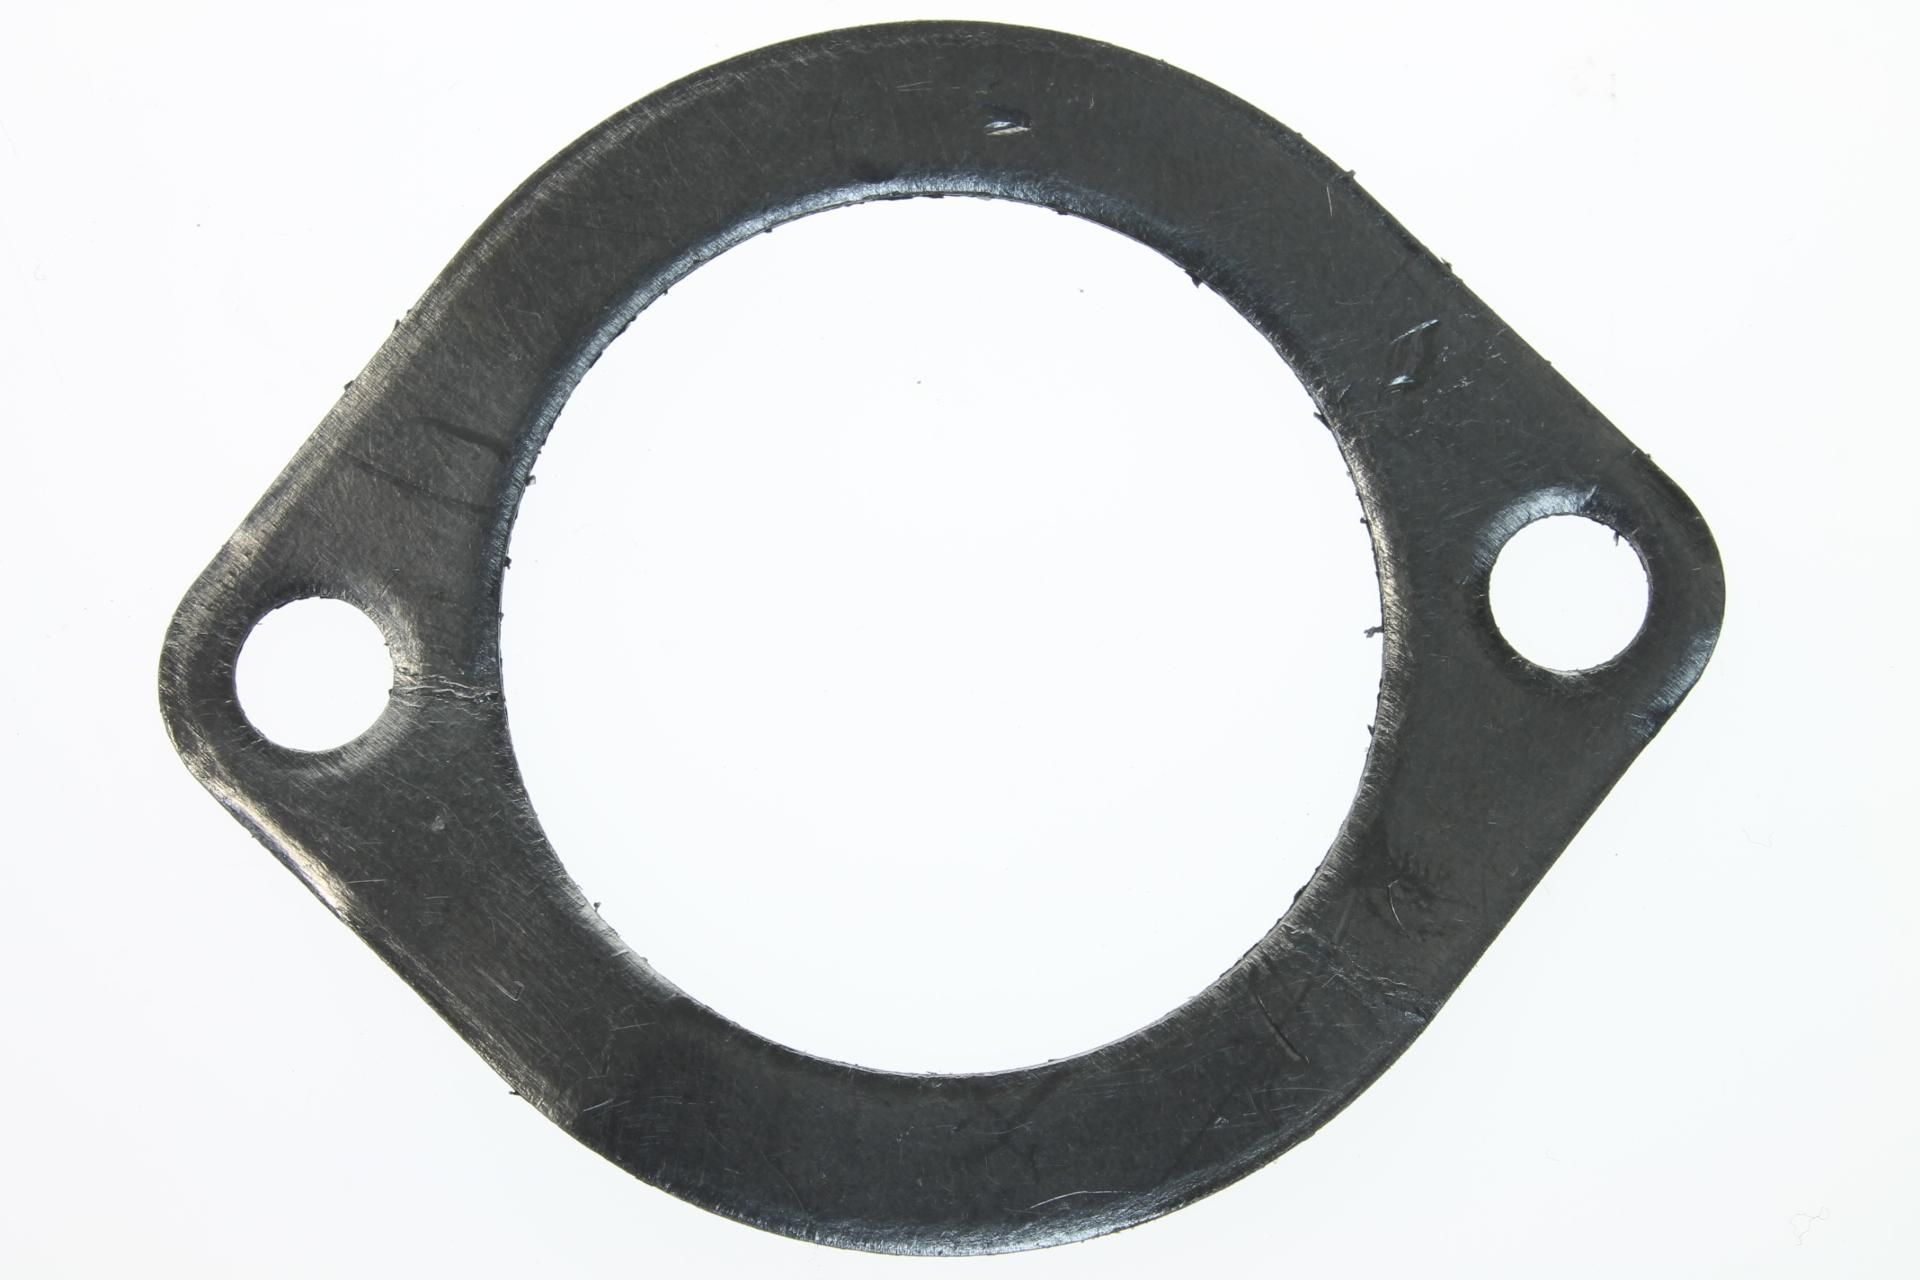 KD11060-1959 Outlet Elbow Gasket OEM Kawasaki Replacement